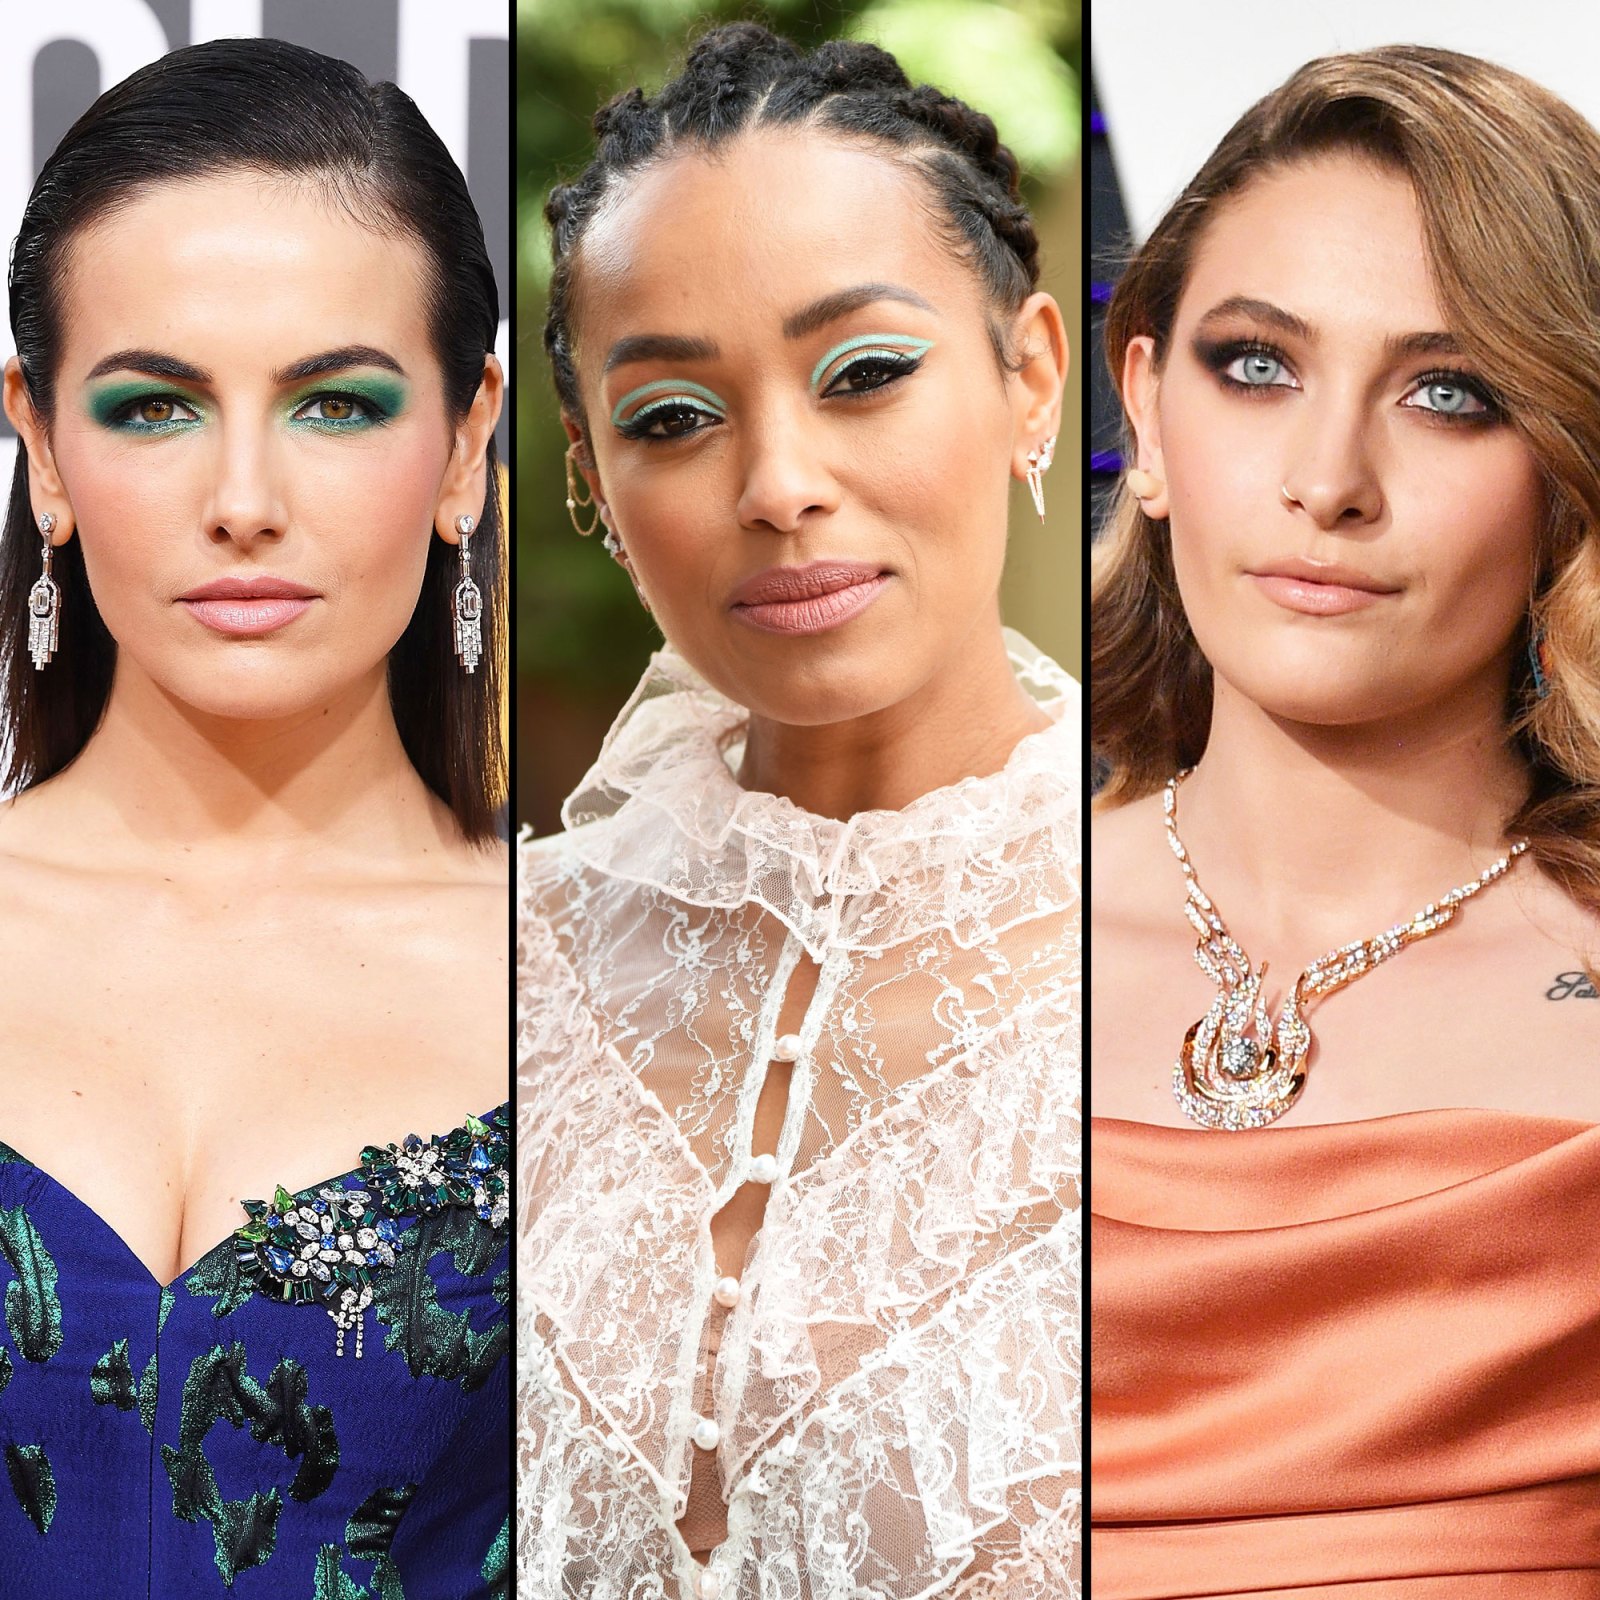 Camilla Belle Melanie Liburd Paris Jackson Celebs Are Here With All the Coachella Beauty Inspo You Need